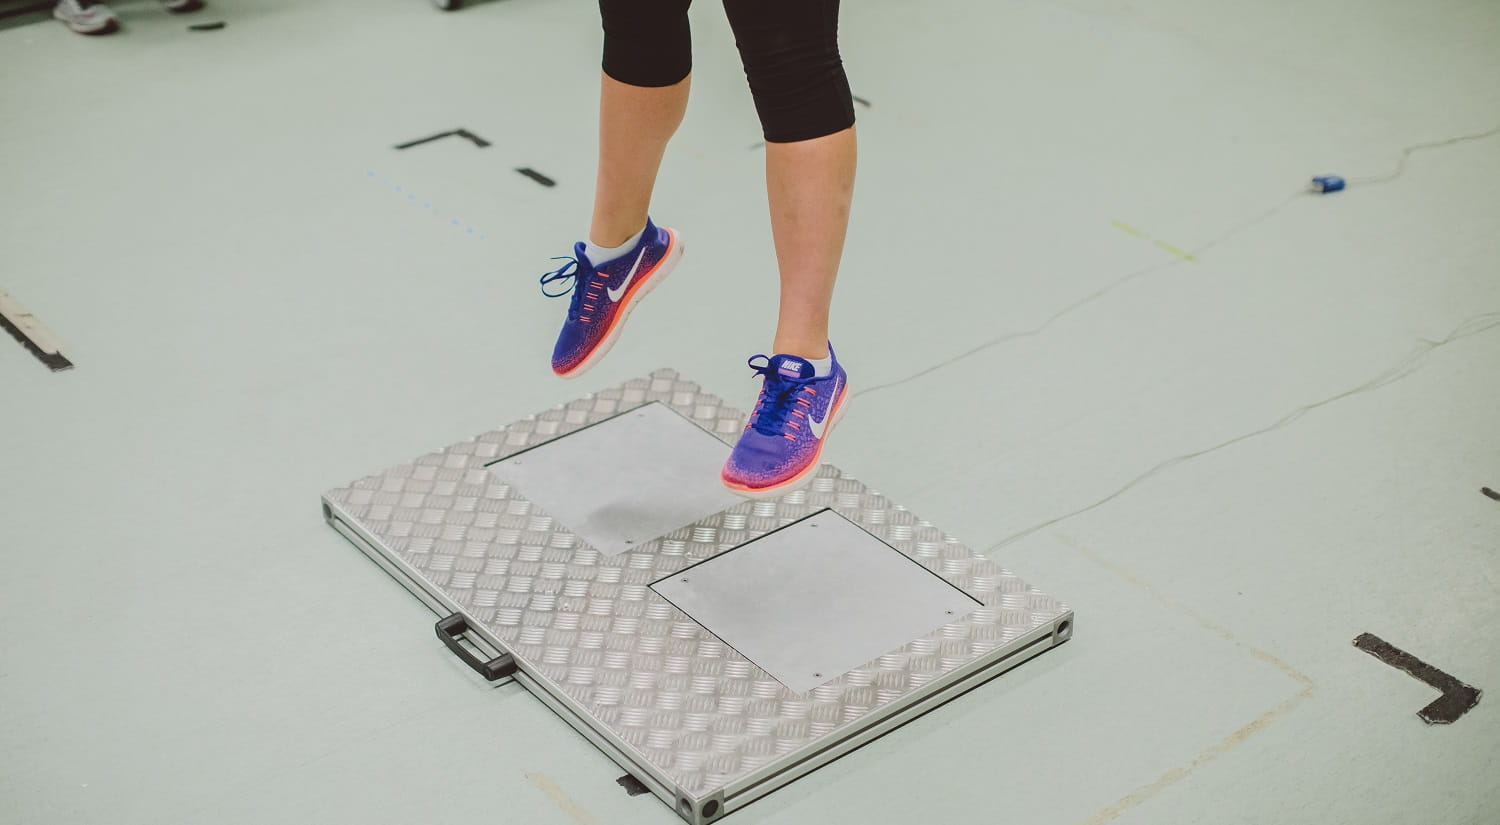 Our Biomechanics lab has a range of equipment used by students and researchers, including several types of forceplates.